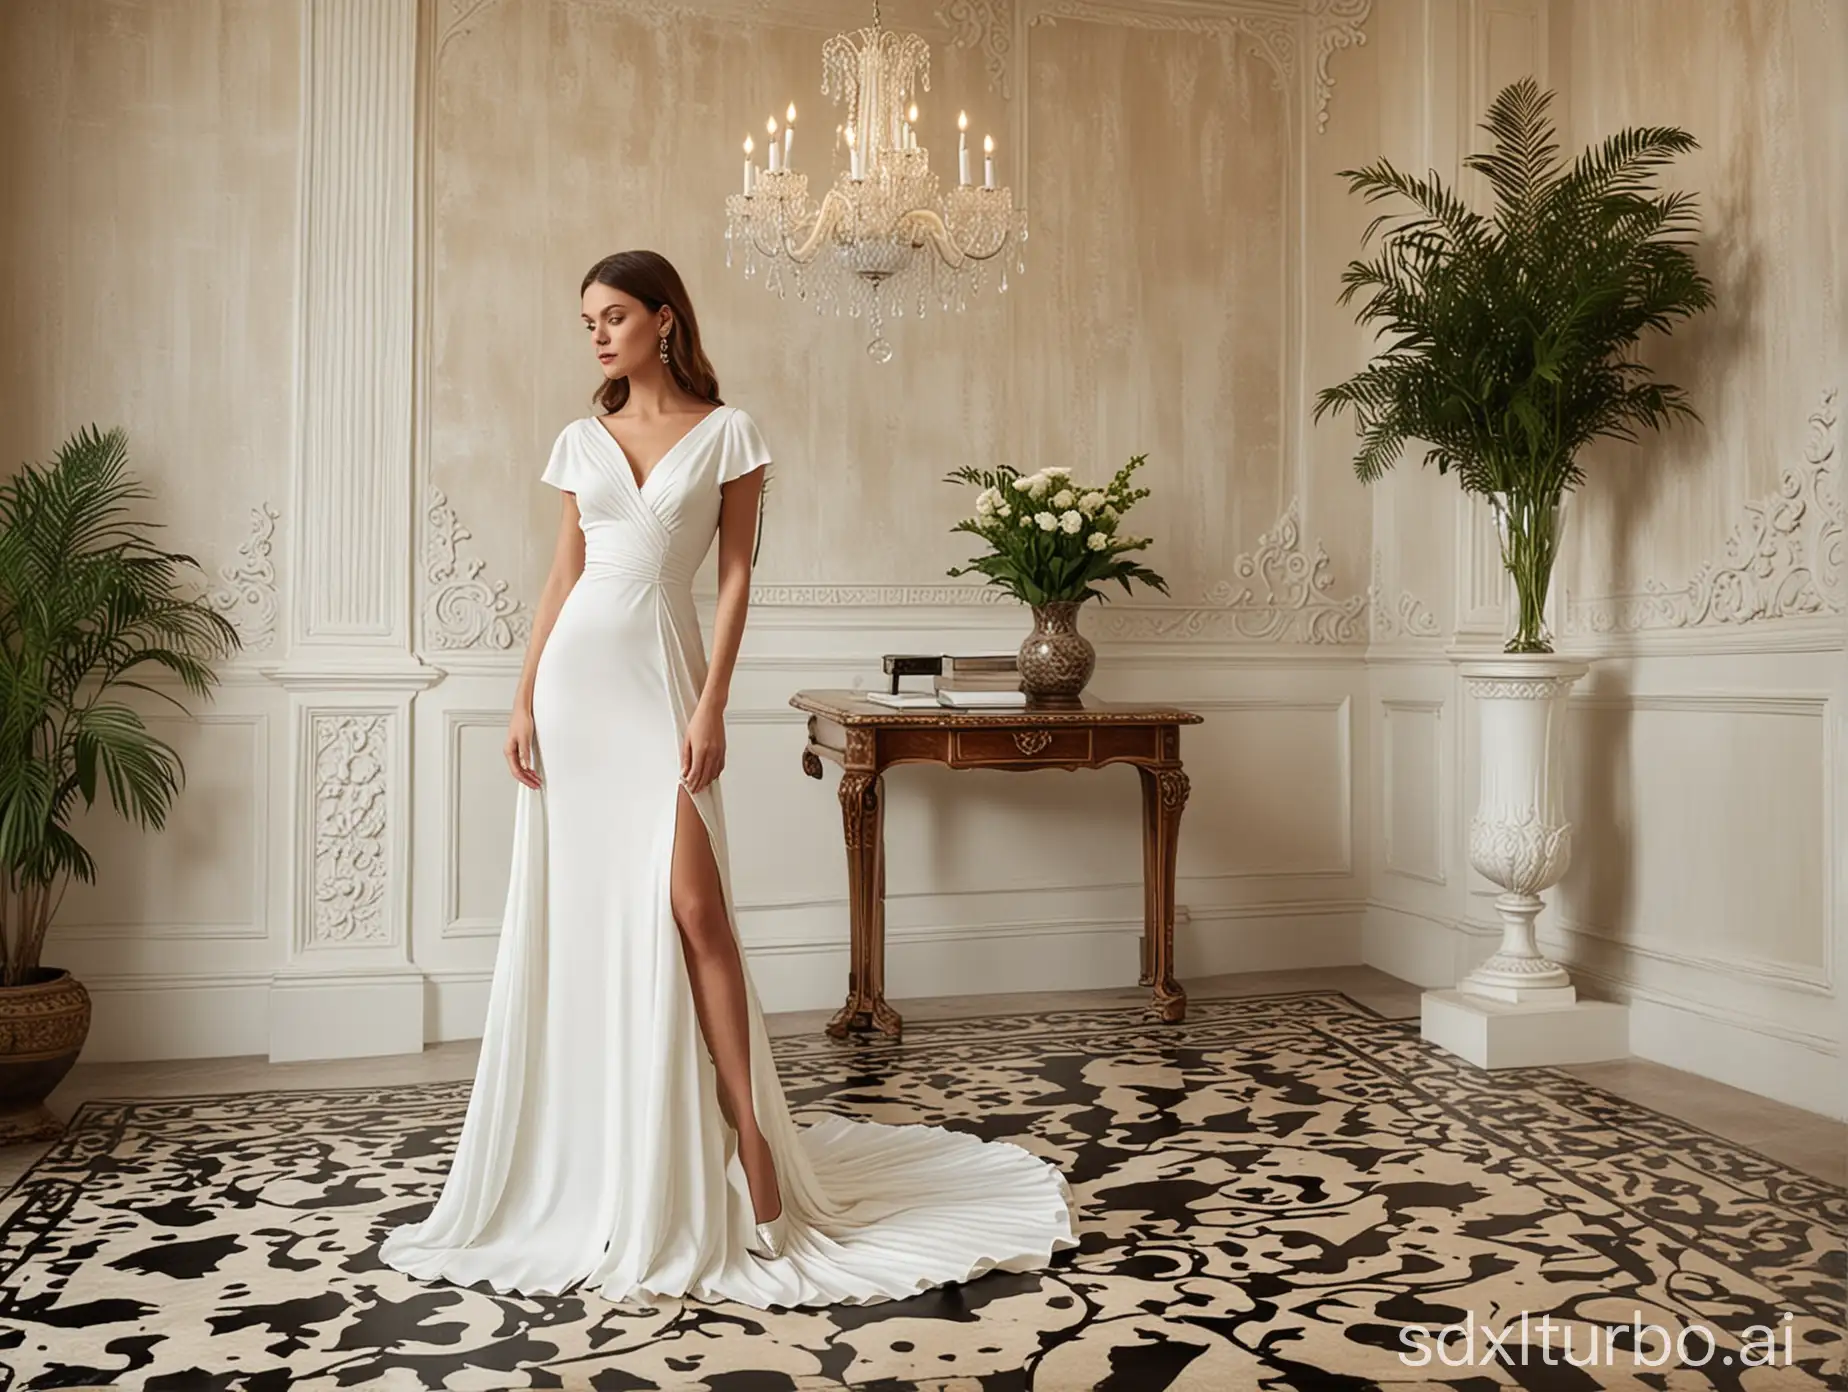 Elegant-Person-in-Luxurious-White-Dress-Graceful-Attire-in-Magnificent-Surroundings